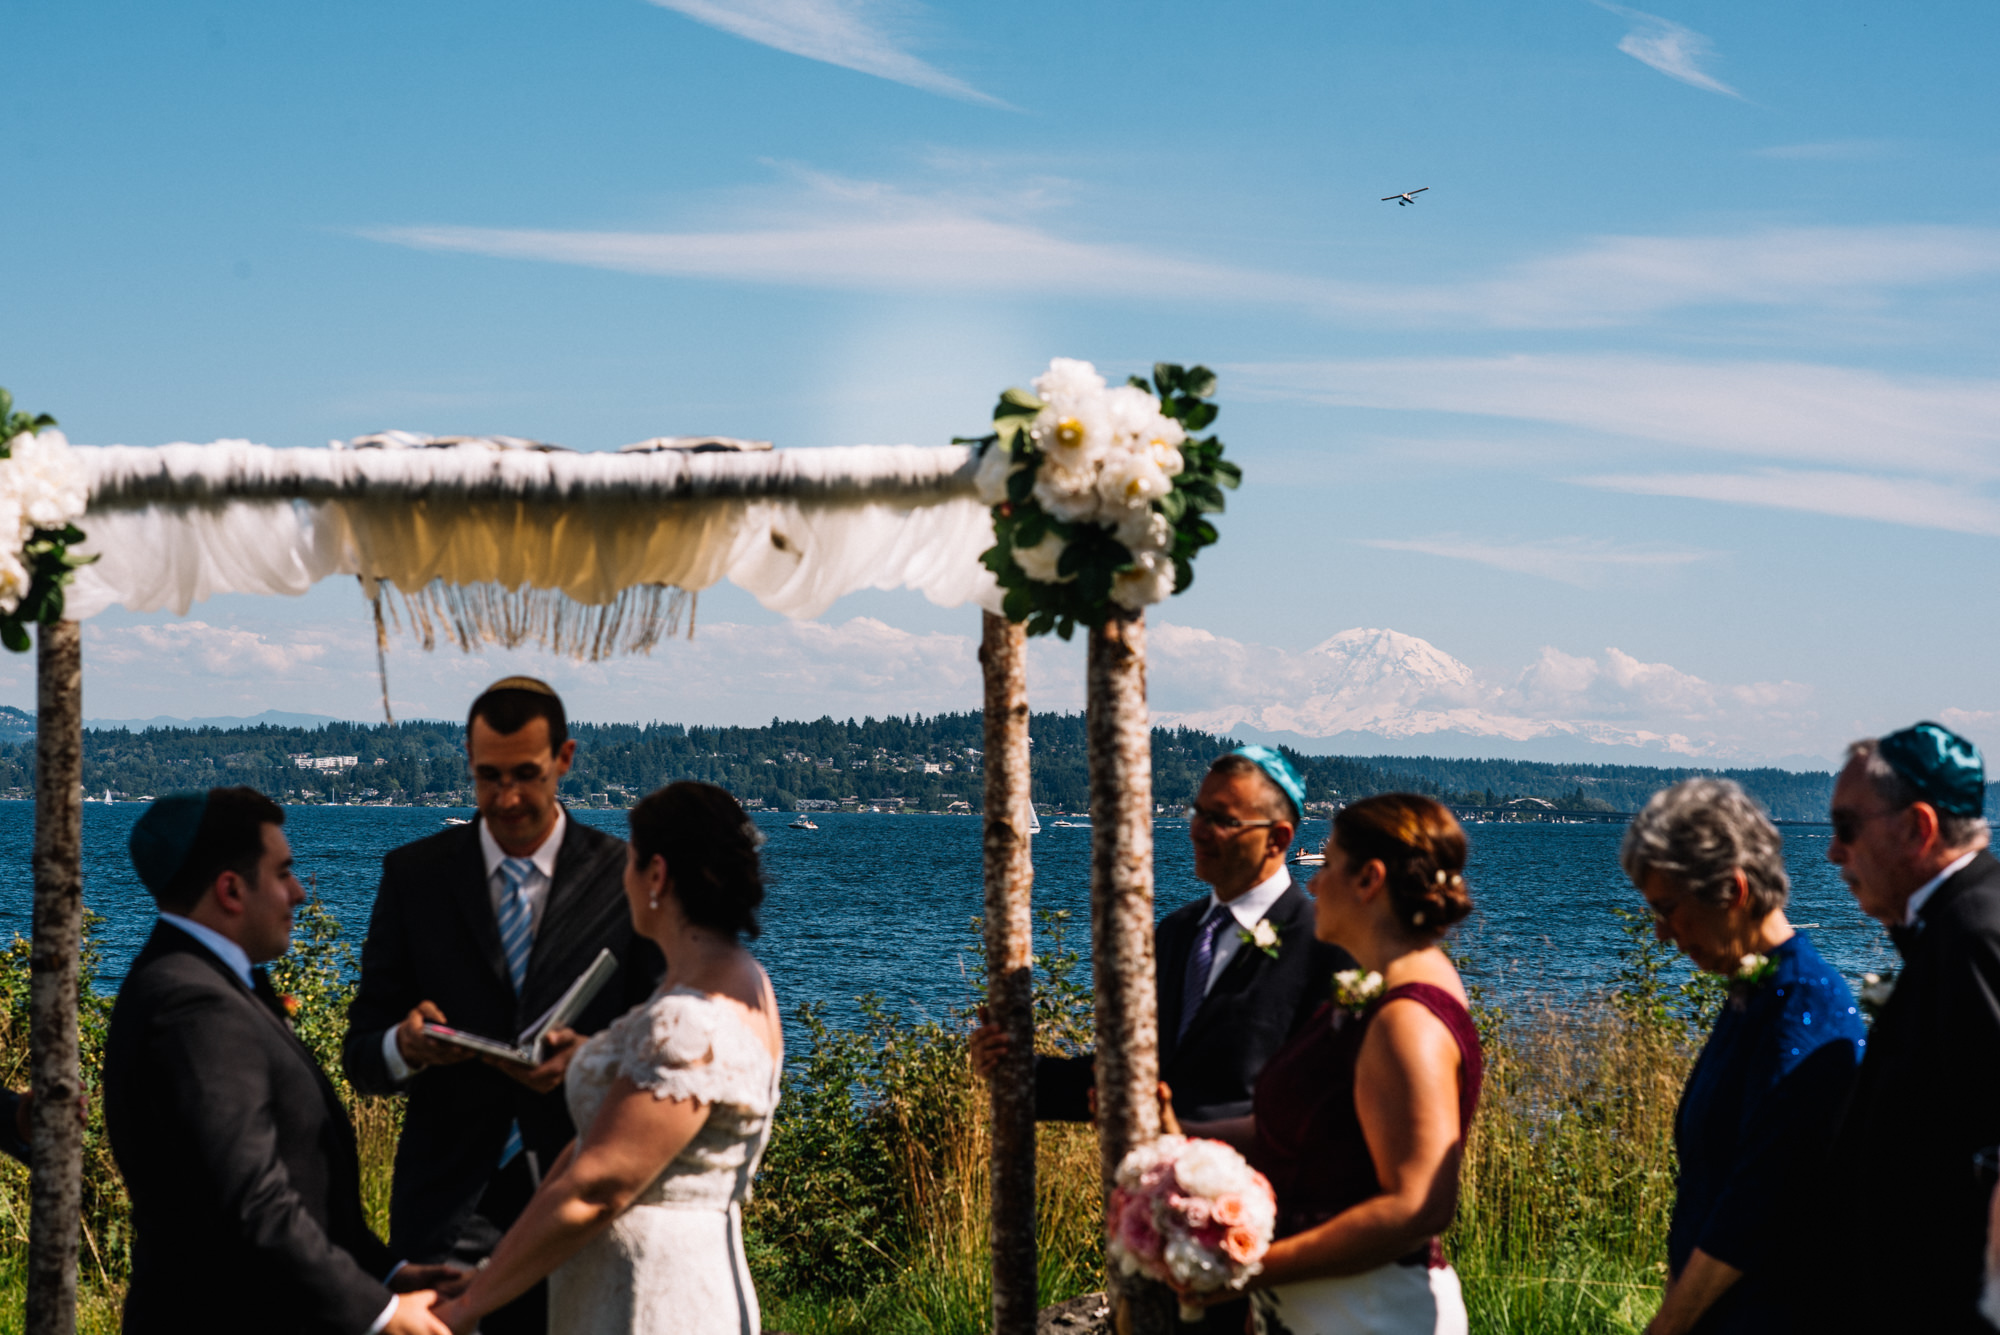 Mount Rainier is clear in the distance on this beautiful summer day on the Puget Sound. Joelle and Ryan were married at the Seattle Tennis Club, a wedding venue and sports club in Seattle, WA. Photo by Seattle Wedding Photographers Jennifer Tai Photo Artistry.